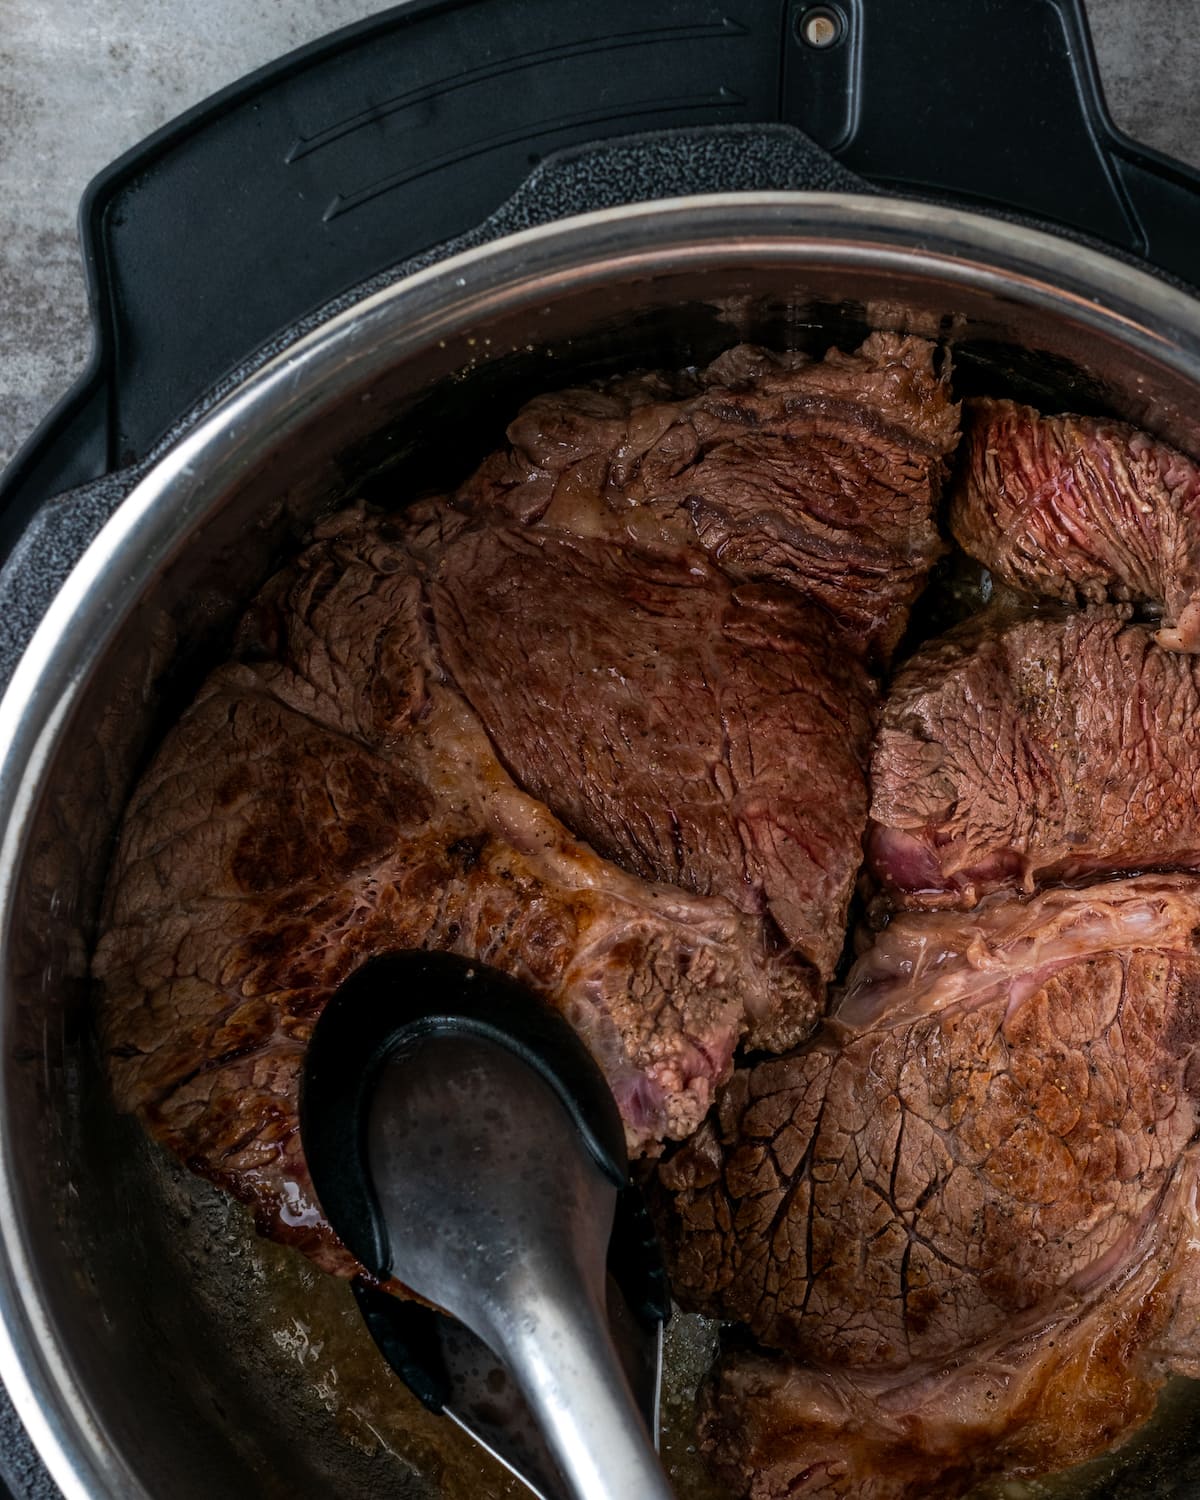 Tongs are used to move around seared chuck roast inside the Instant Pot.